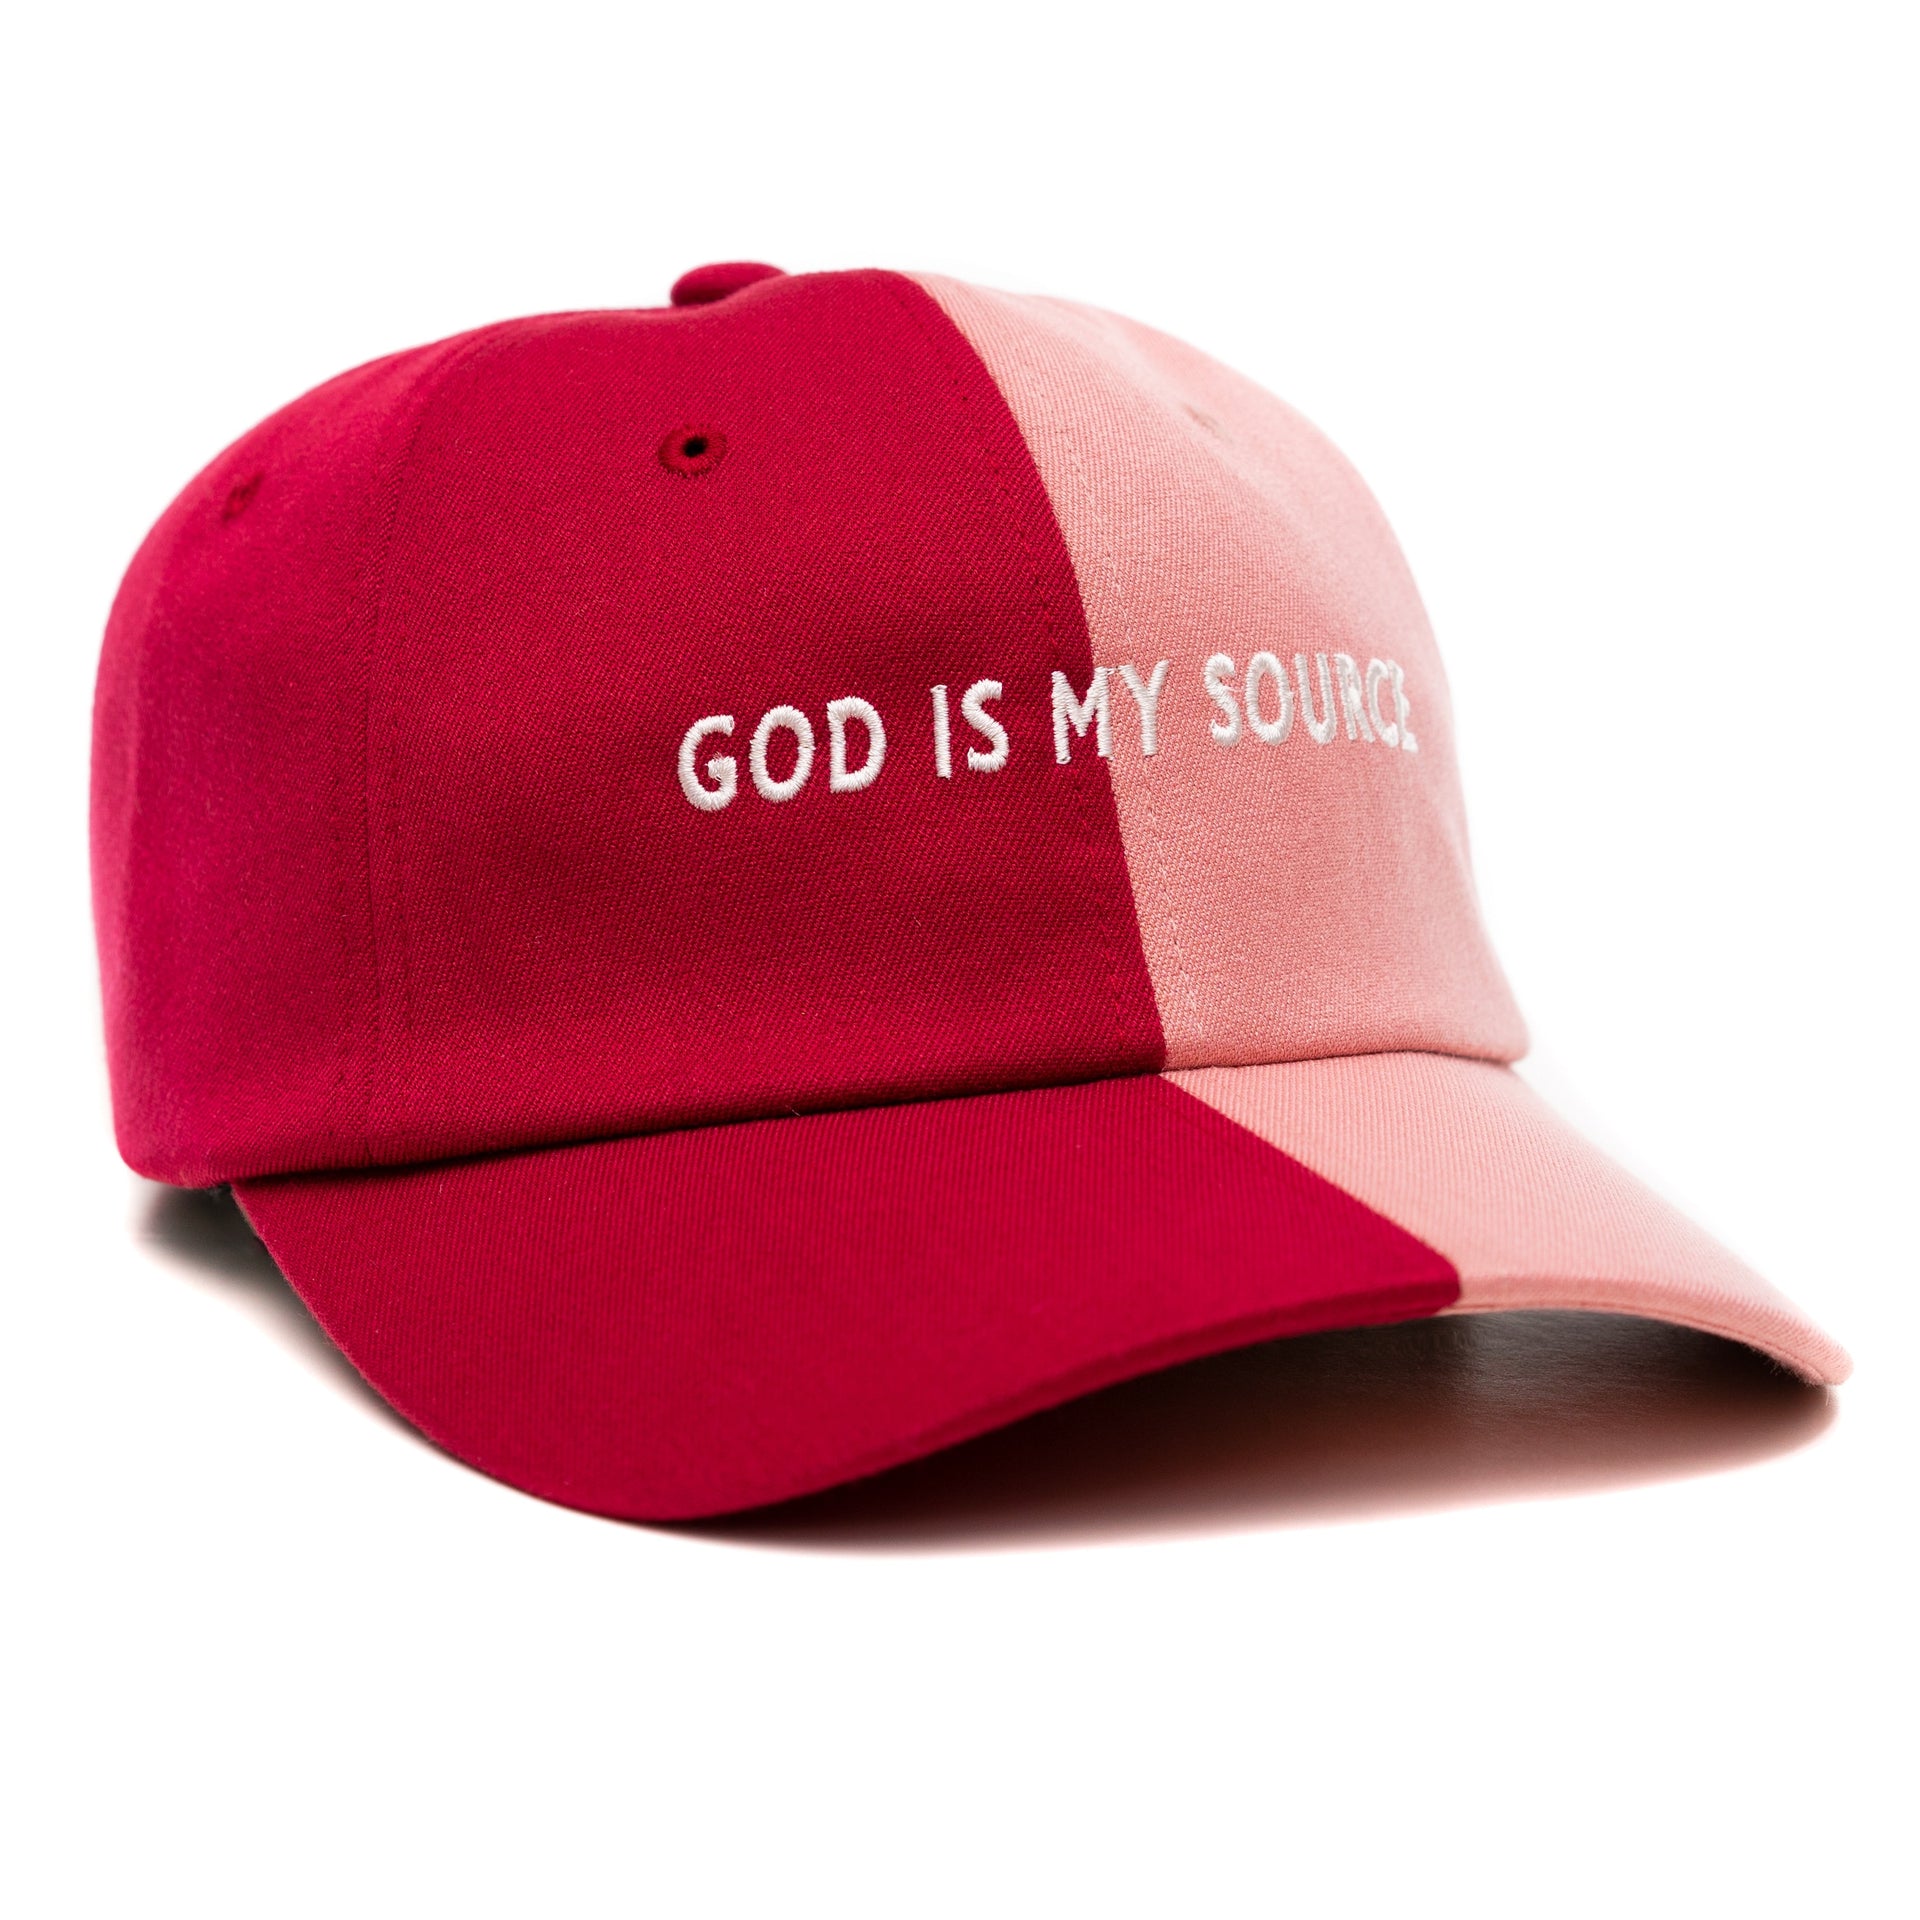 God Is My Source Dad Hat Pink | Burgundy / white - God Is My Source